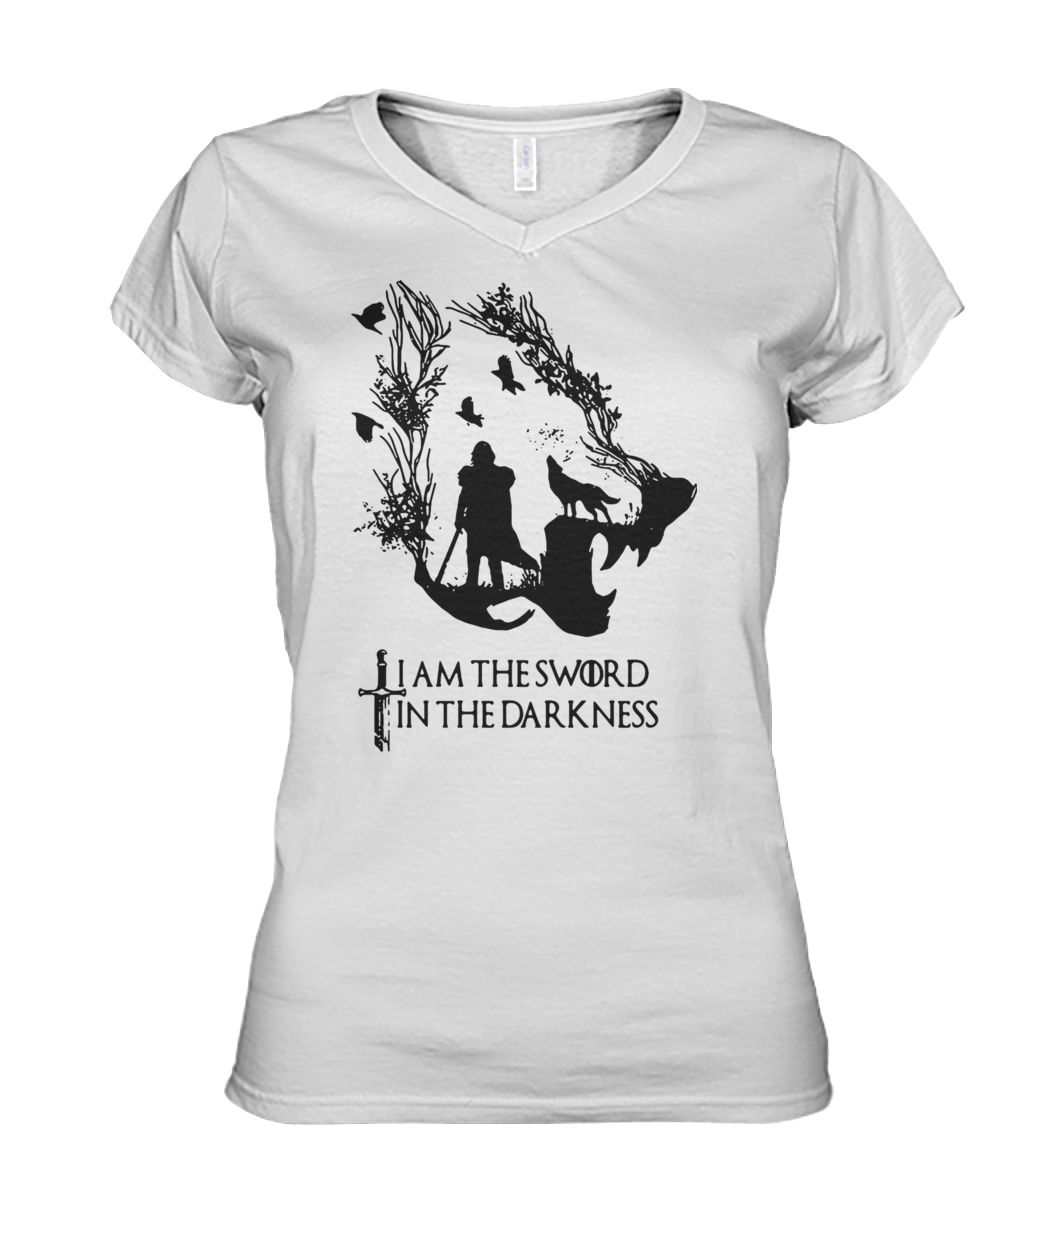 Game of thrones jon snow I am the sword in the darkness women's v-neck